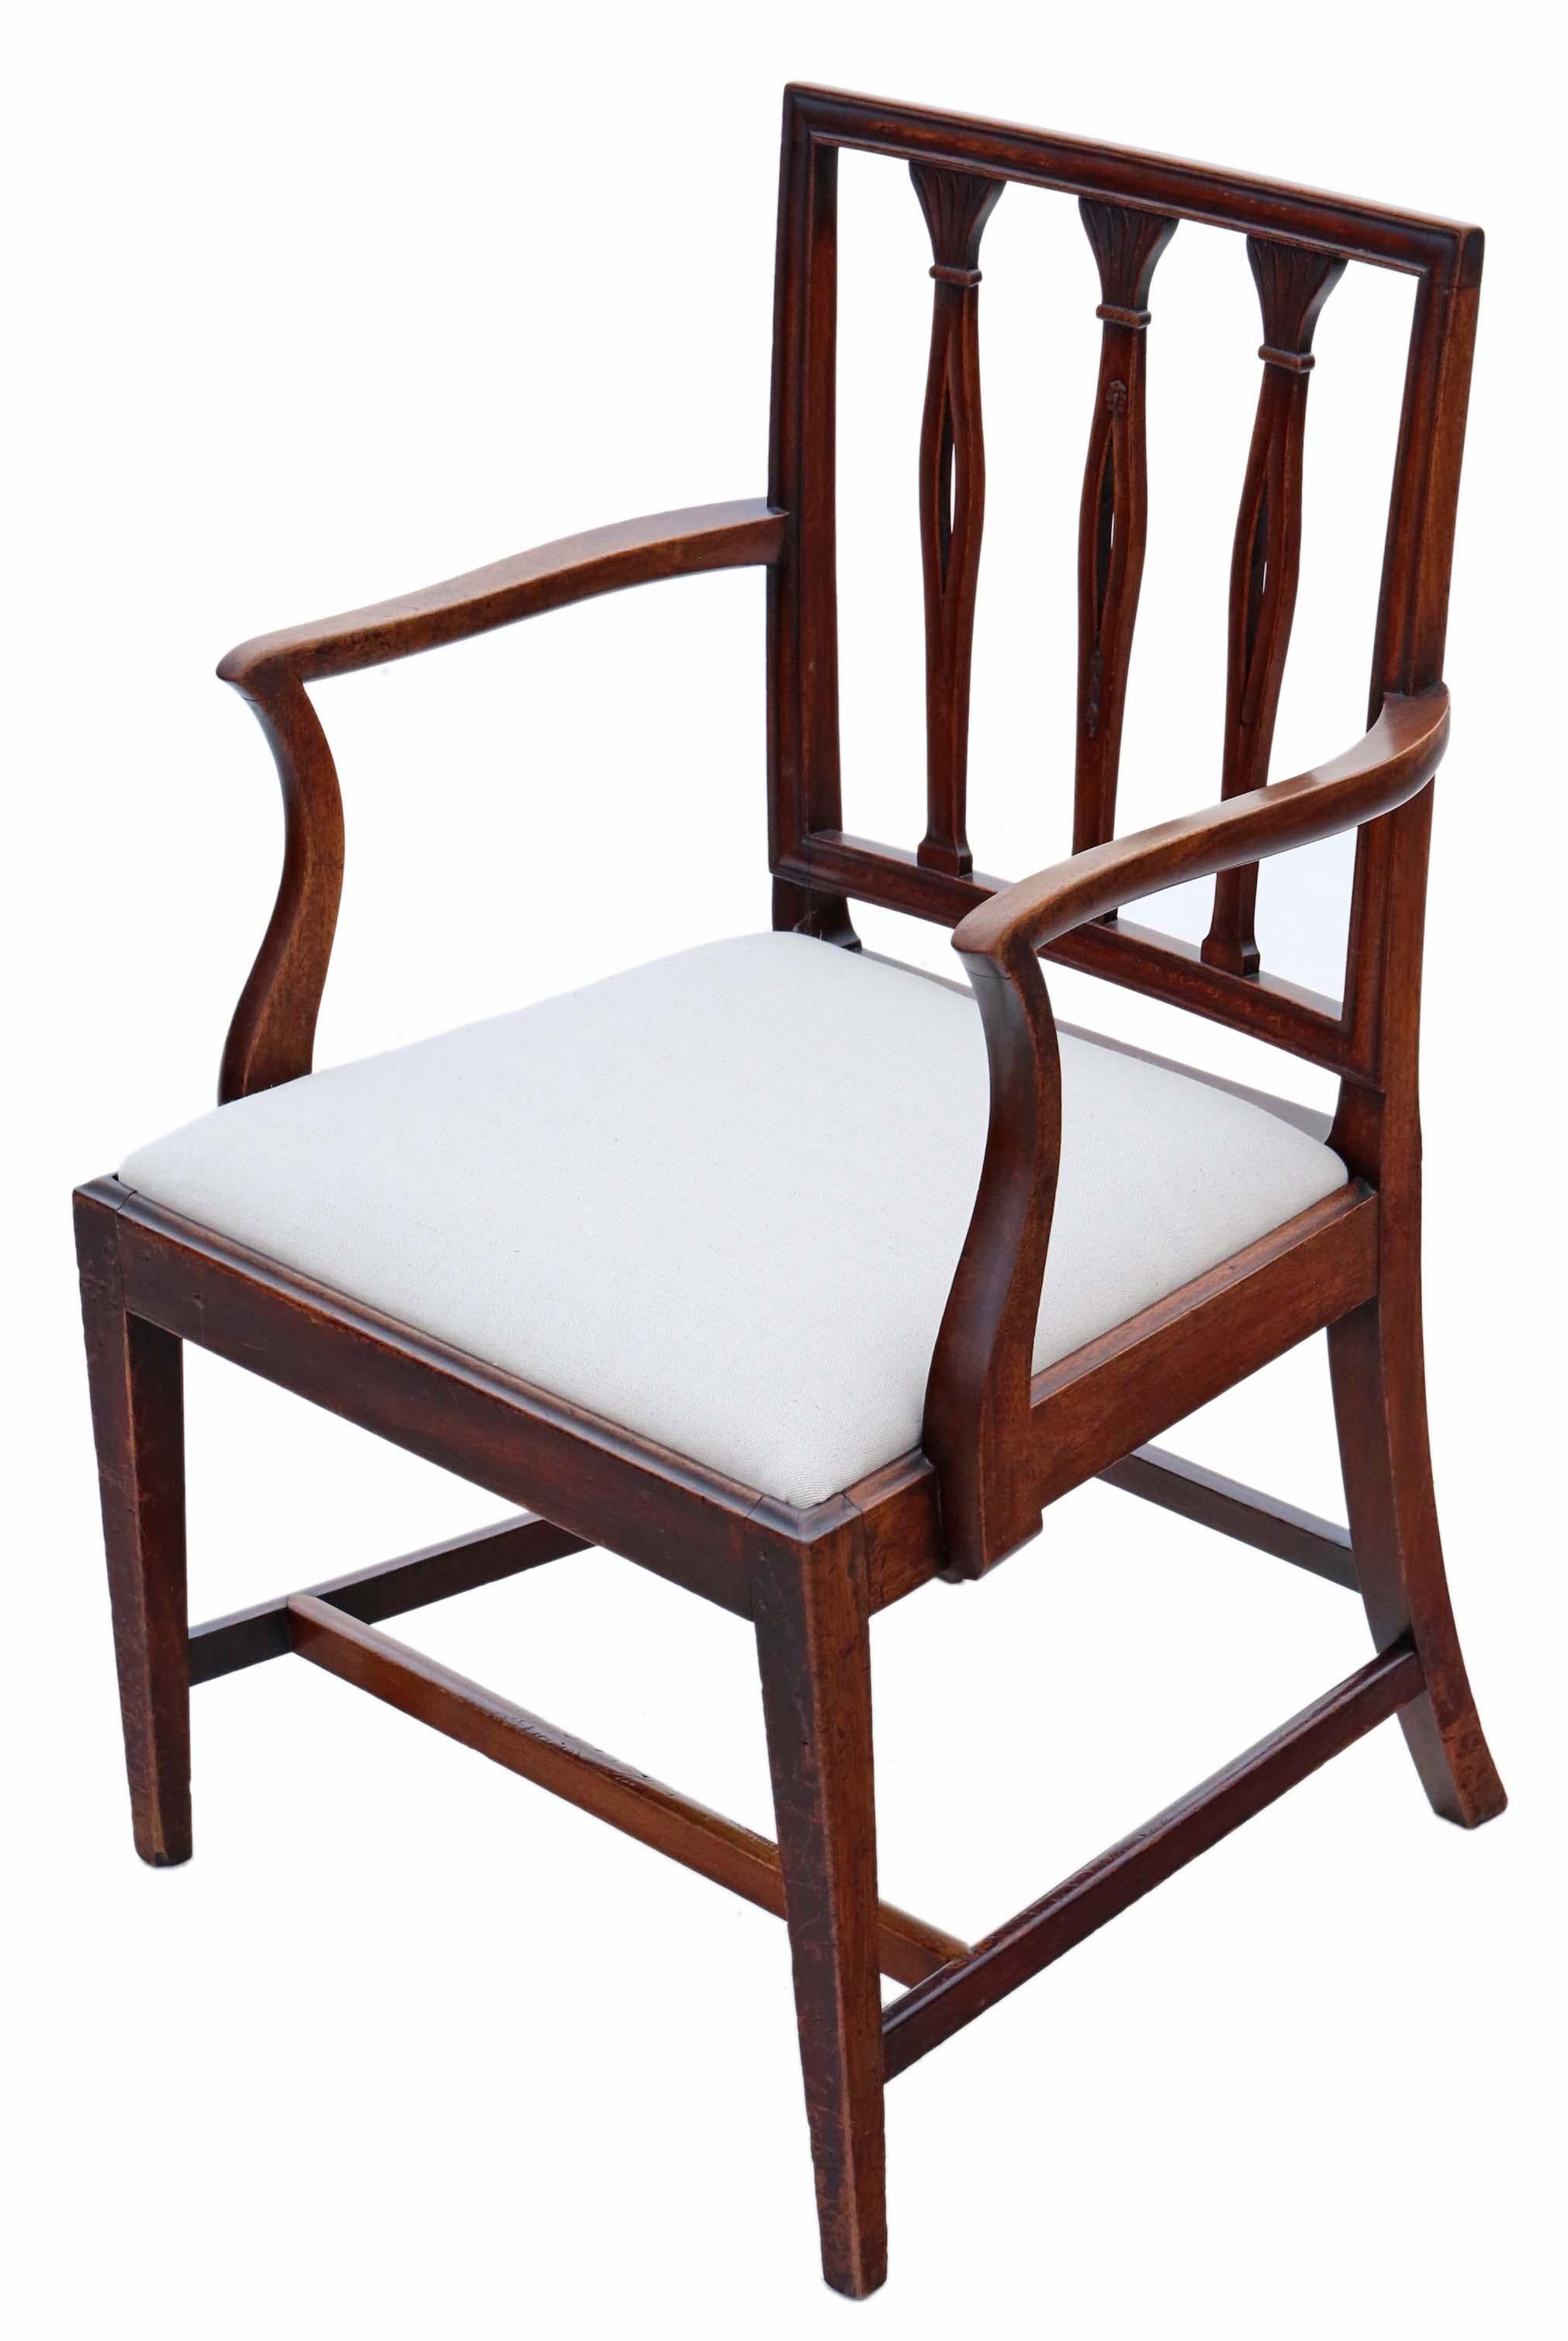 19th Century 18th Century Mahogany Dining Chairs: Set of 8 (6 + 2), Antique Quality, C1820 For Sale